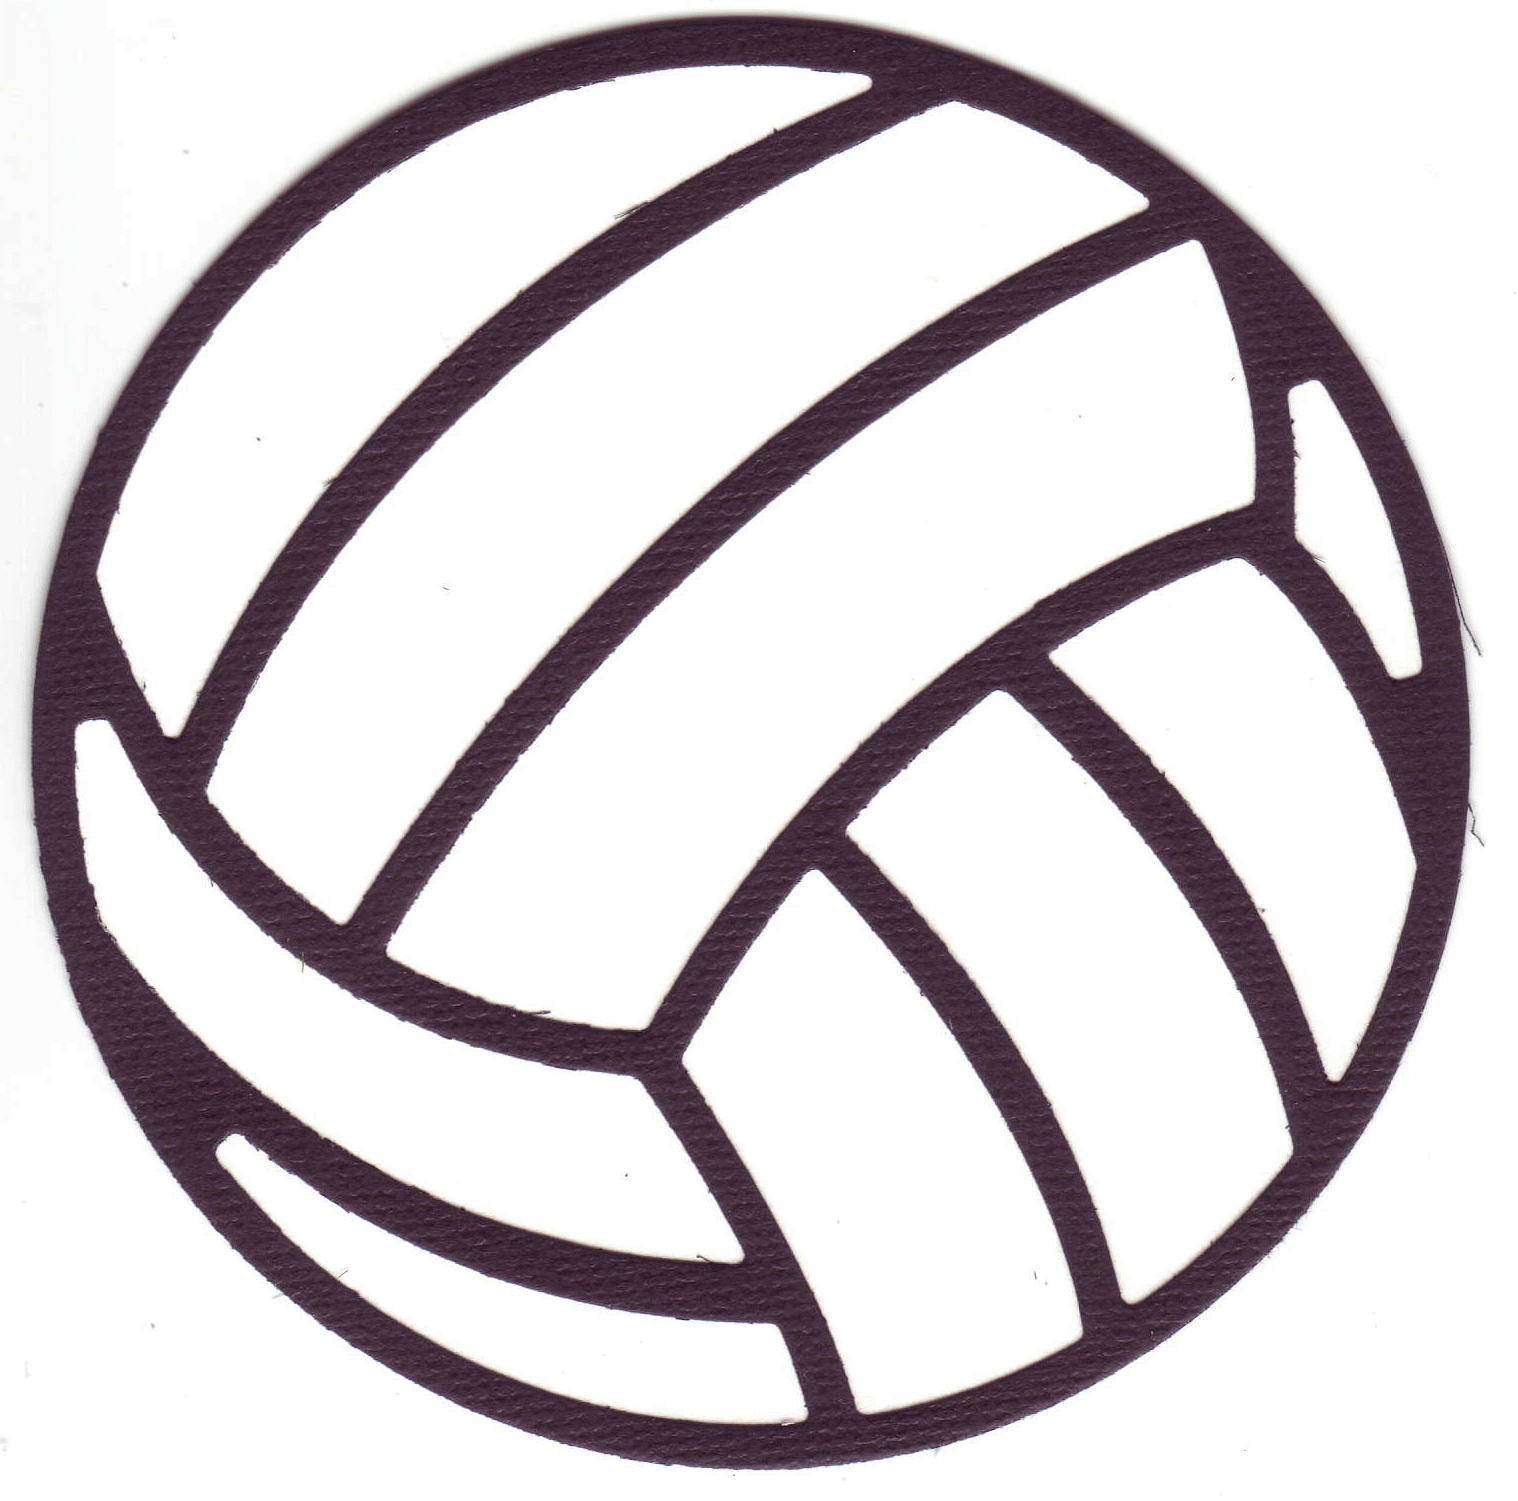 Free Volleyball Outline Cliparts, Download Free Volleyball Outline